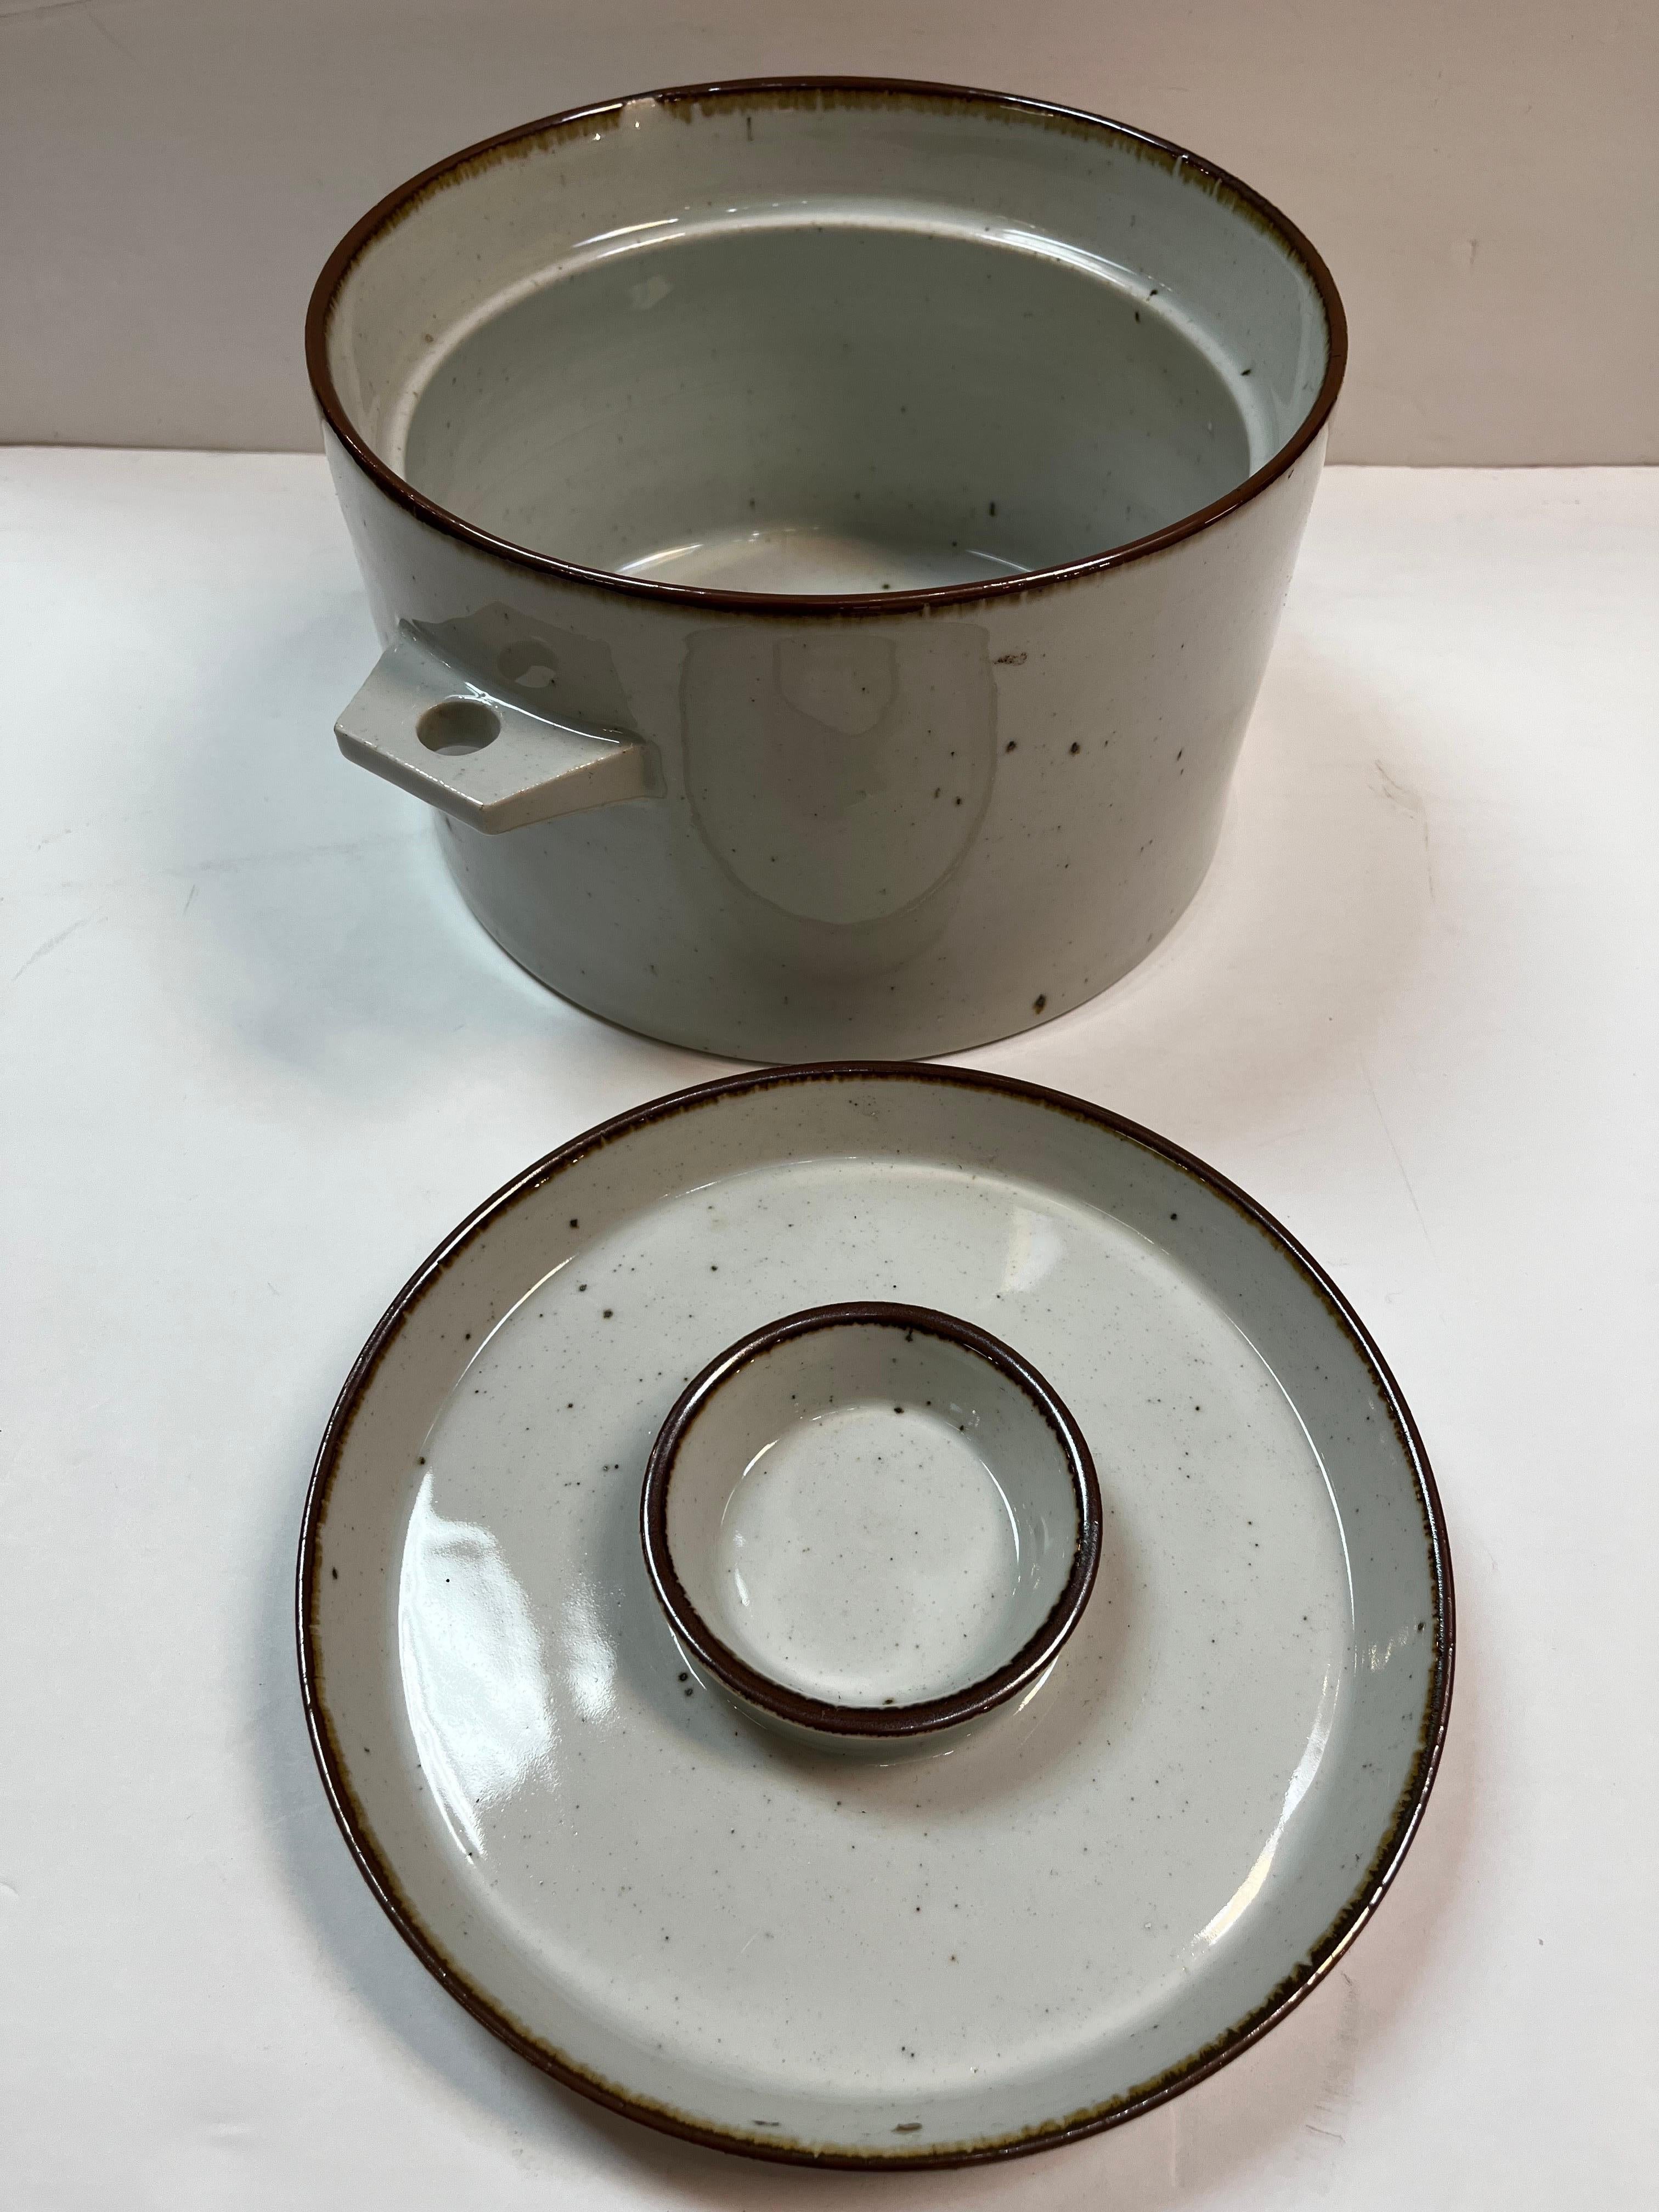 1980s Dansk Denmark Brown Mist Covered Casserole Serving Dish by Niels Refsgaard In Good Condition For Sale In Atlanta, GA